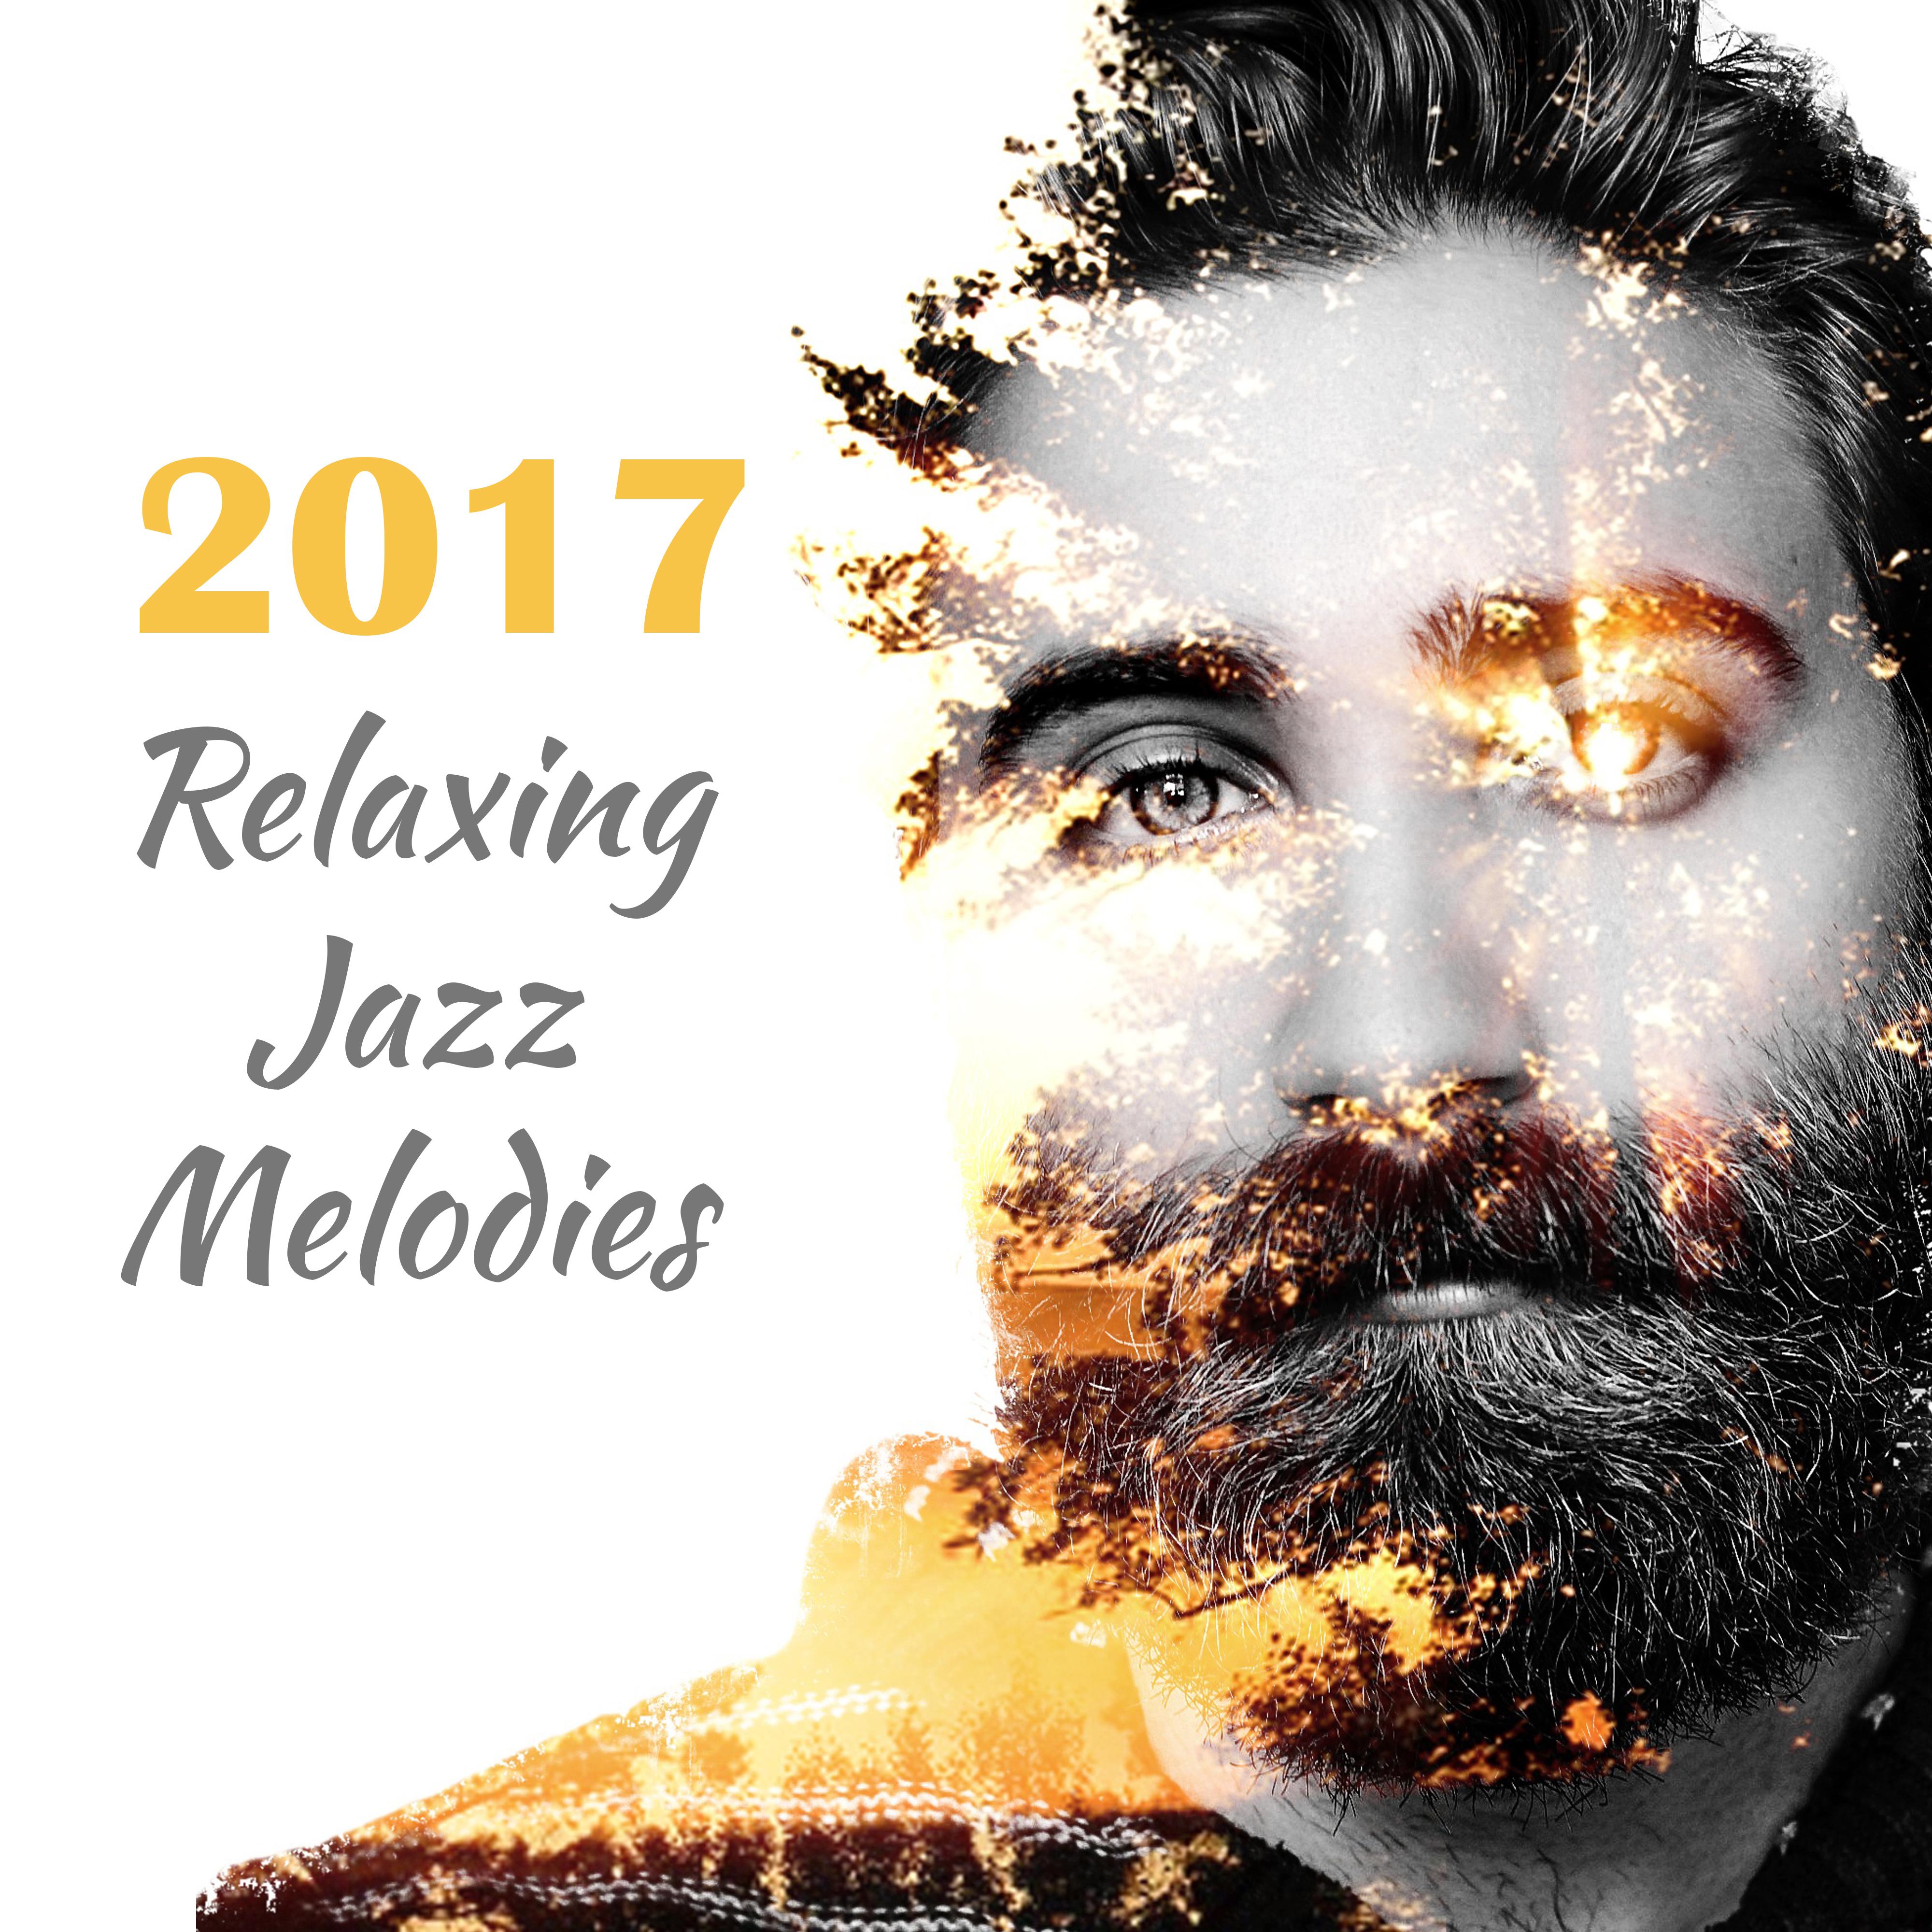 2017 Relaxing Jazz Melodies